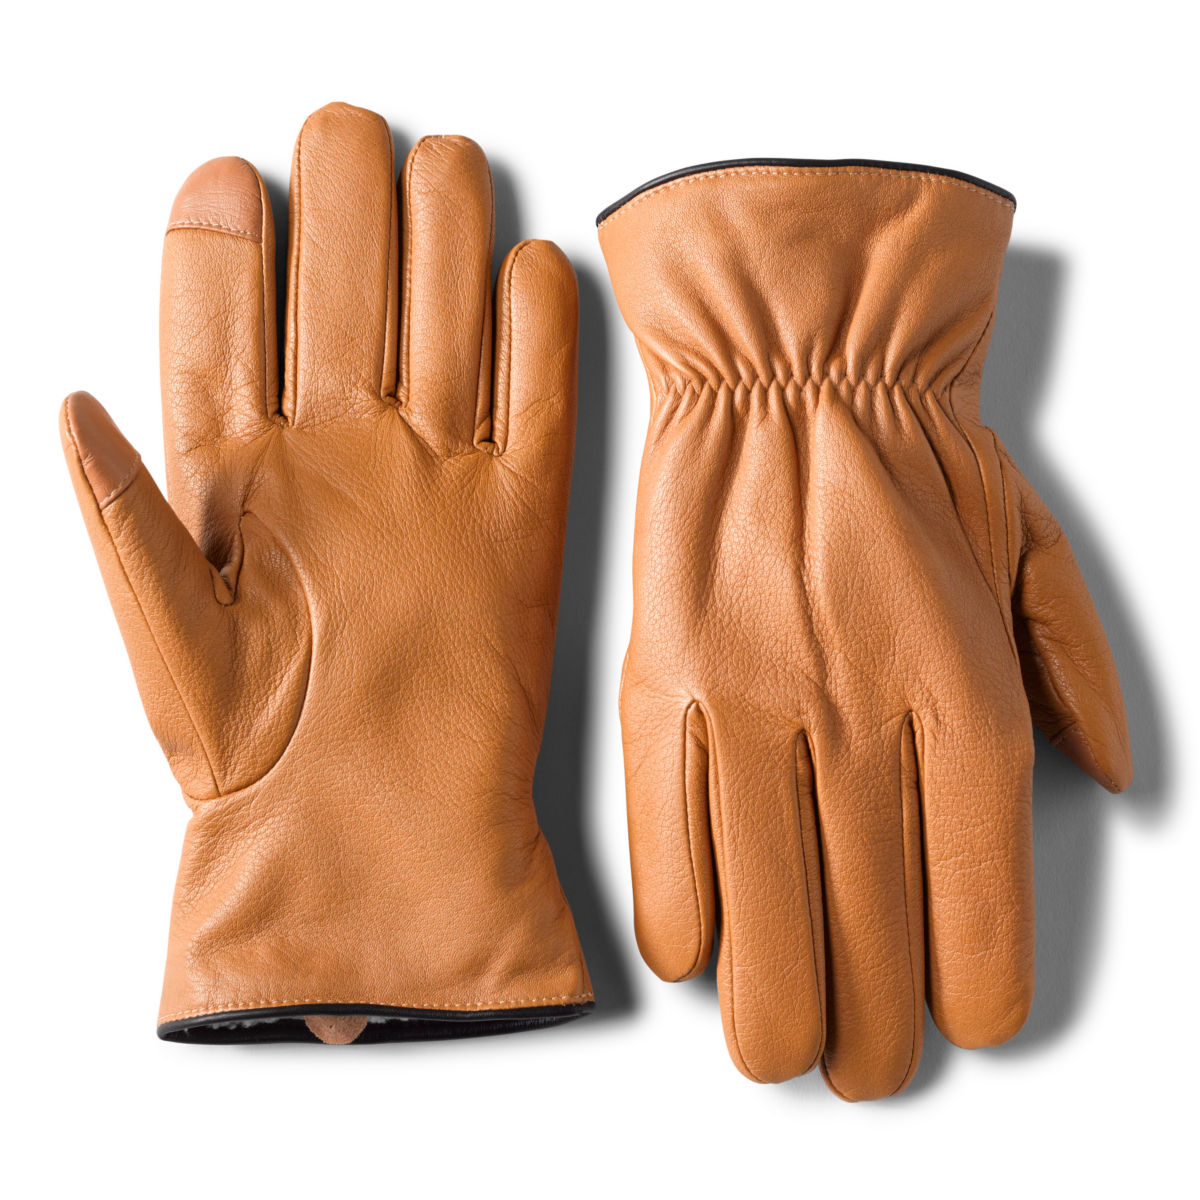 Women’s Leather Shearling-Lined Gloves - TANimage number 0